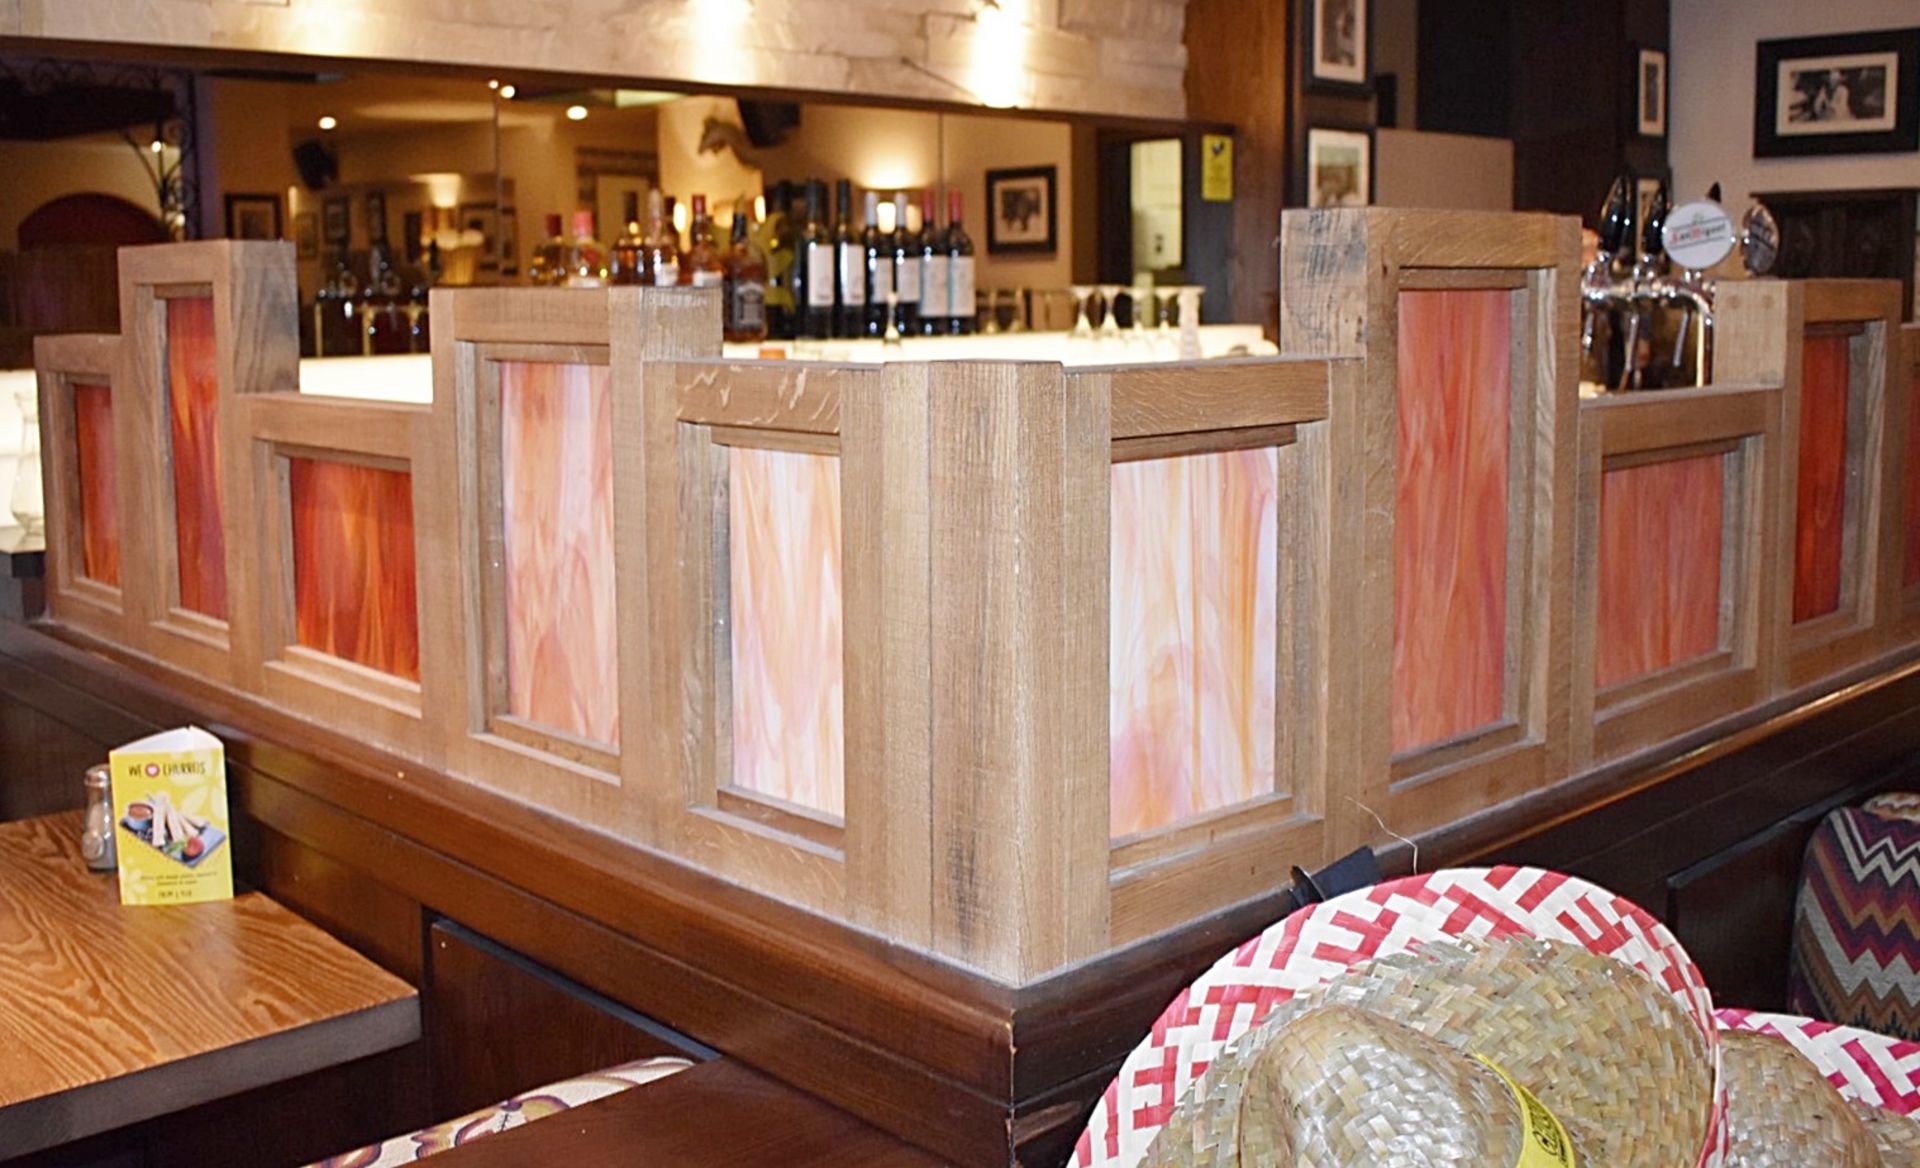 1 x L-Shaped Privacy Divider Featuring Rustic Wooden Framing And Coloured Inlays - Image 8 of 9